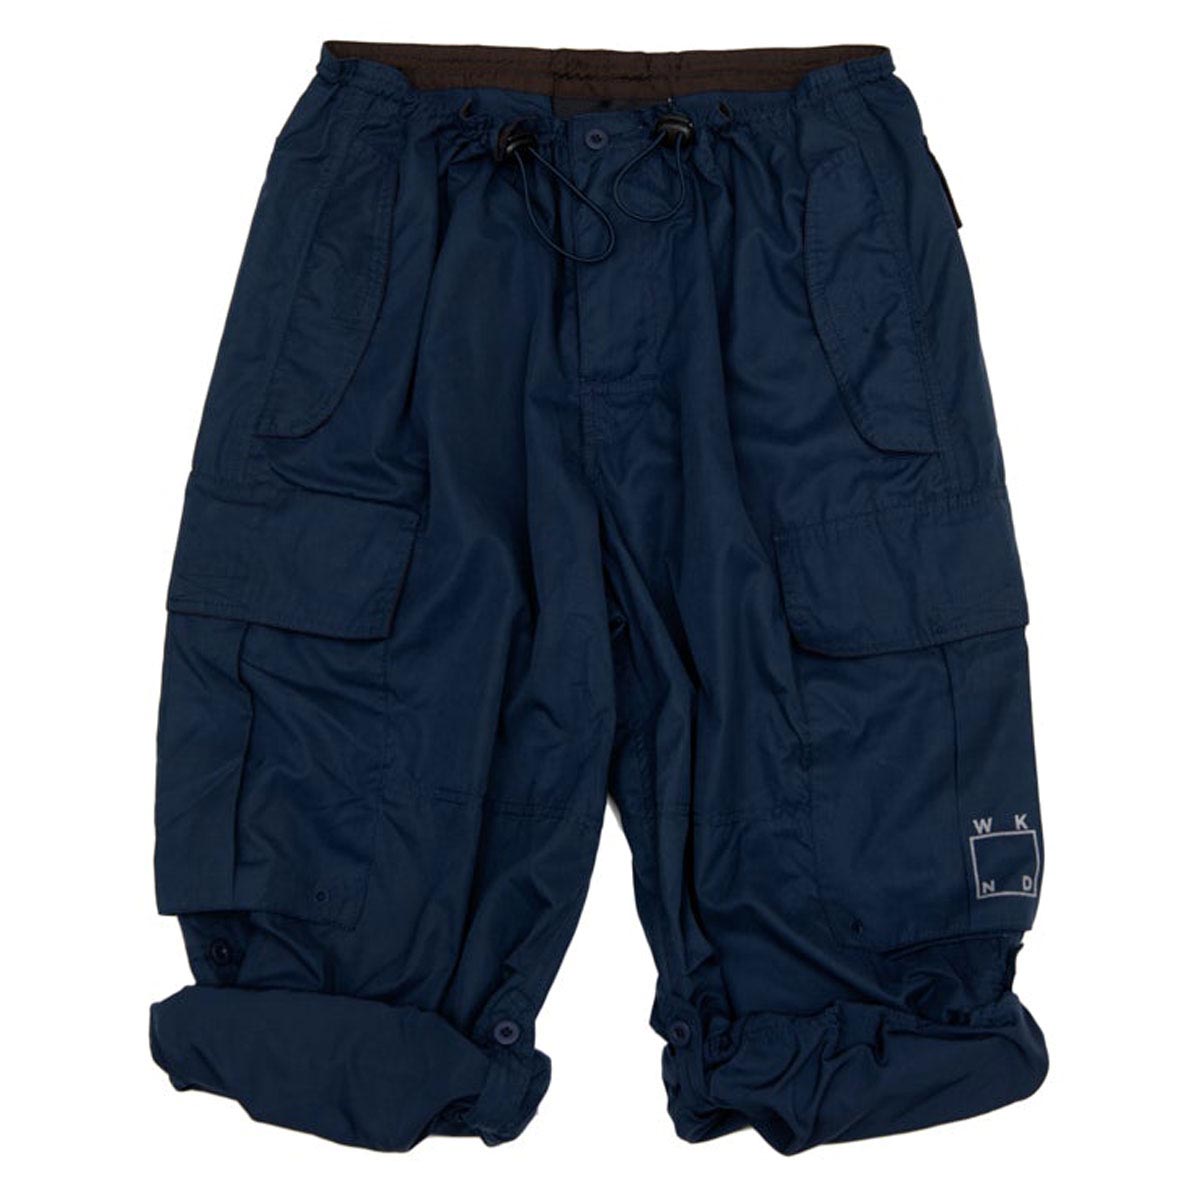 WKND Techie Dirtbags Pants - Navy image 4